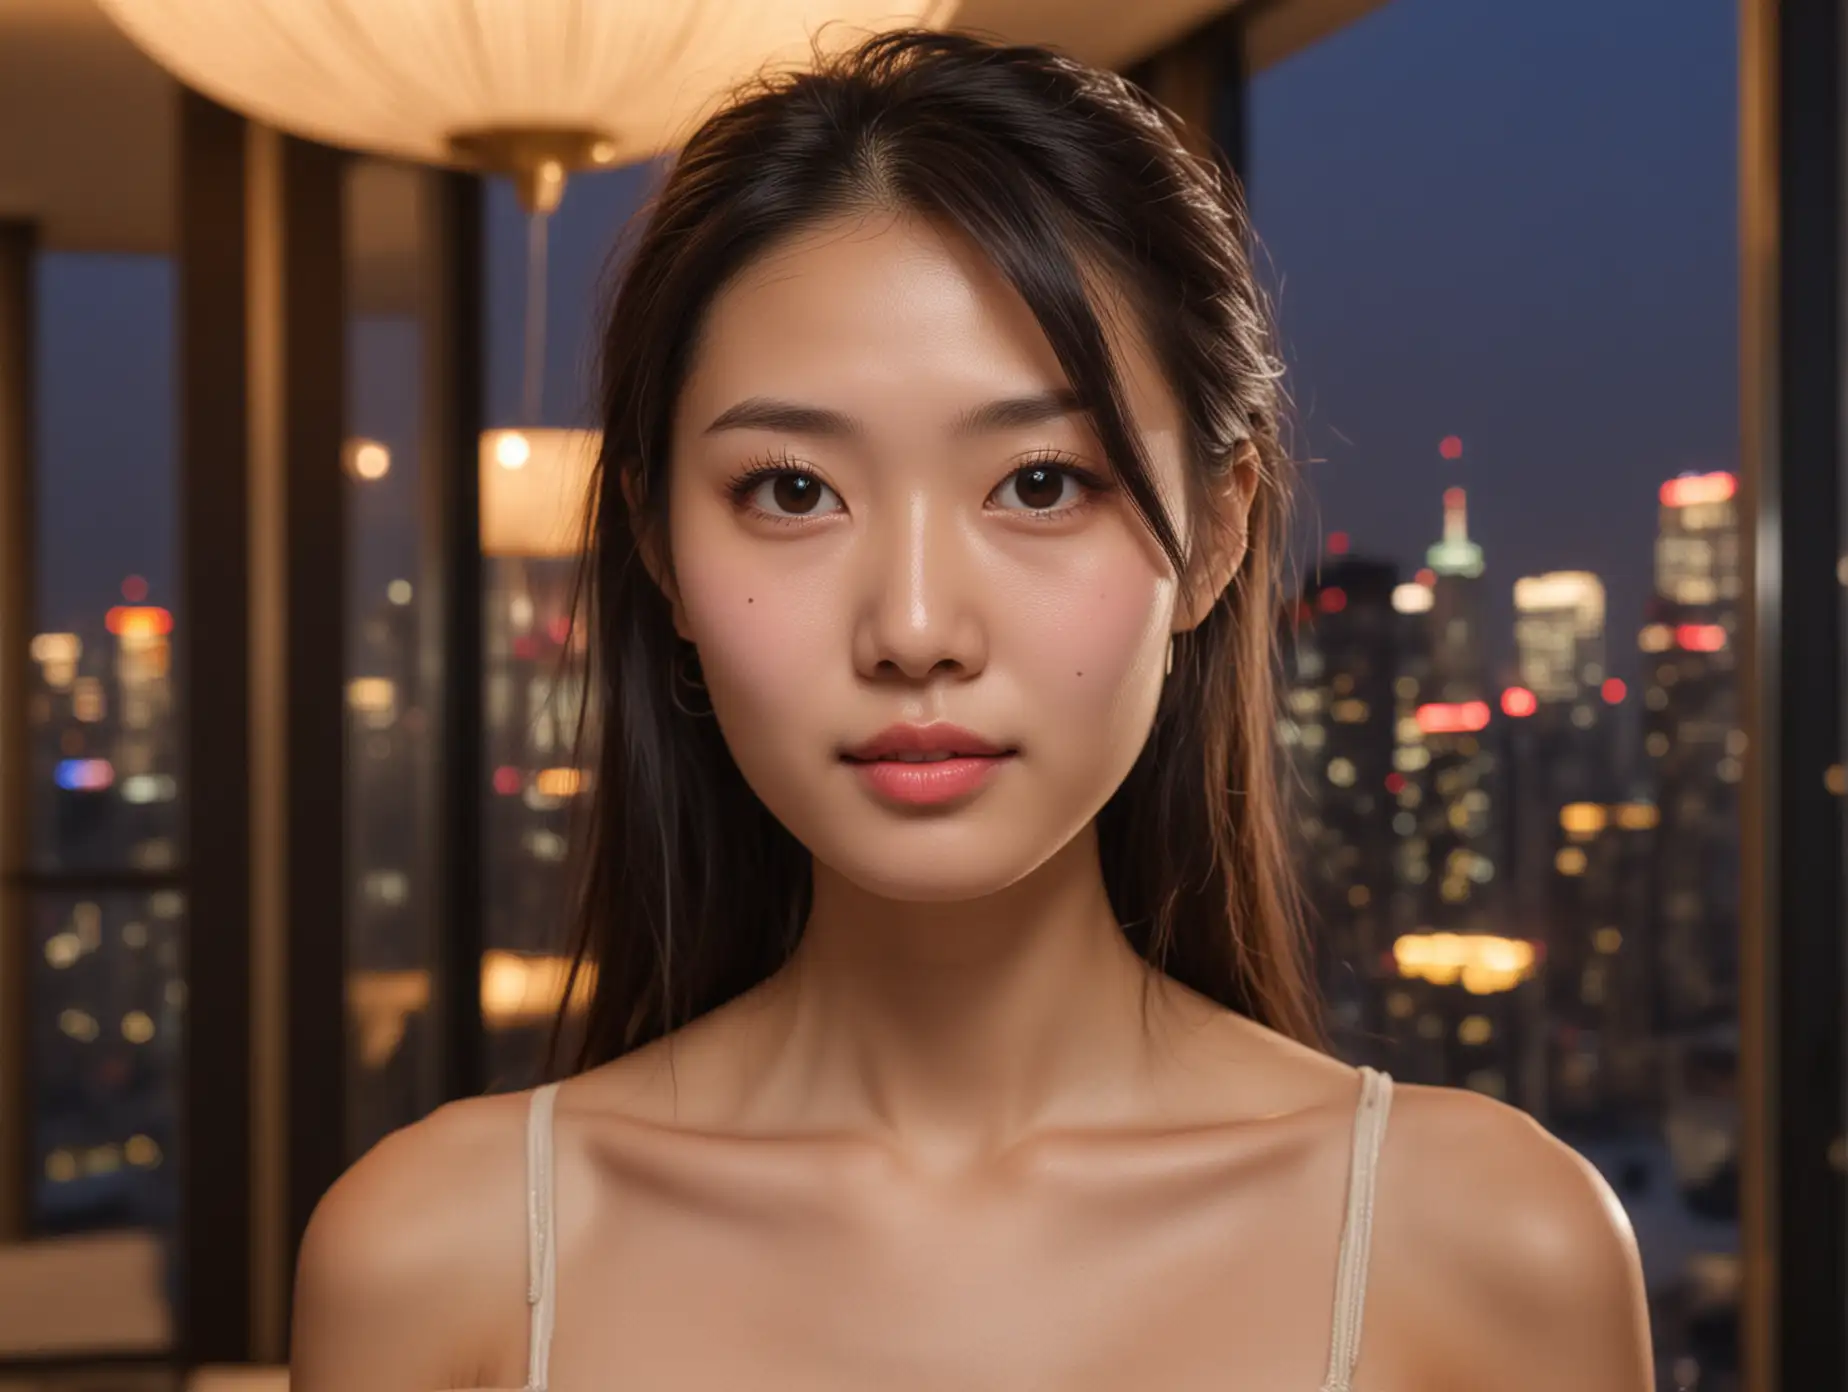 Sweet-Chinese-Young-Woman-with-Soulful-Eyes-at-Luxury-Penthouse-Party